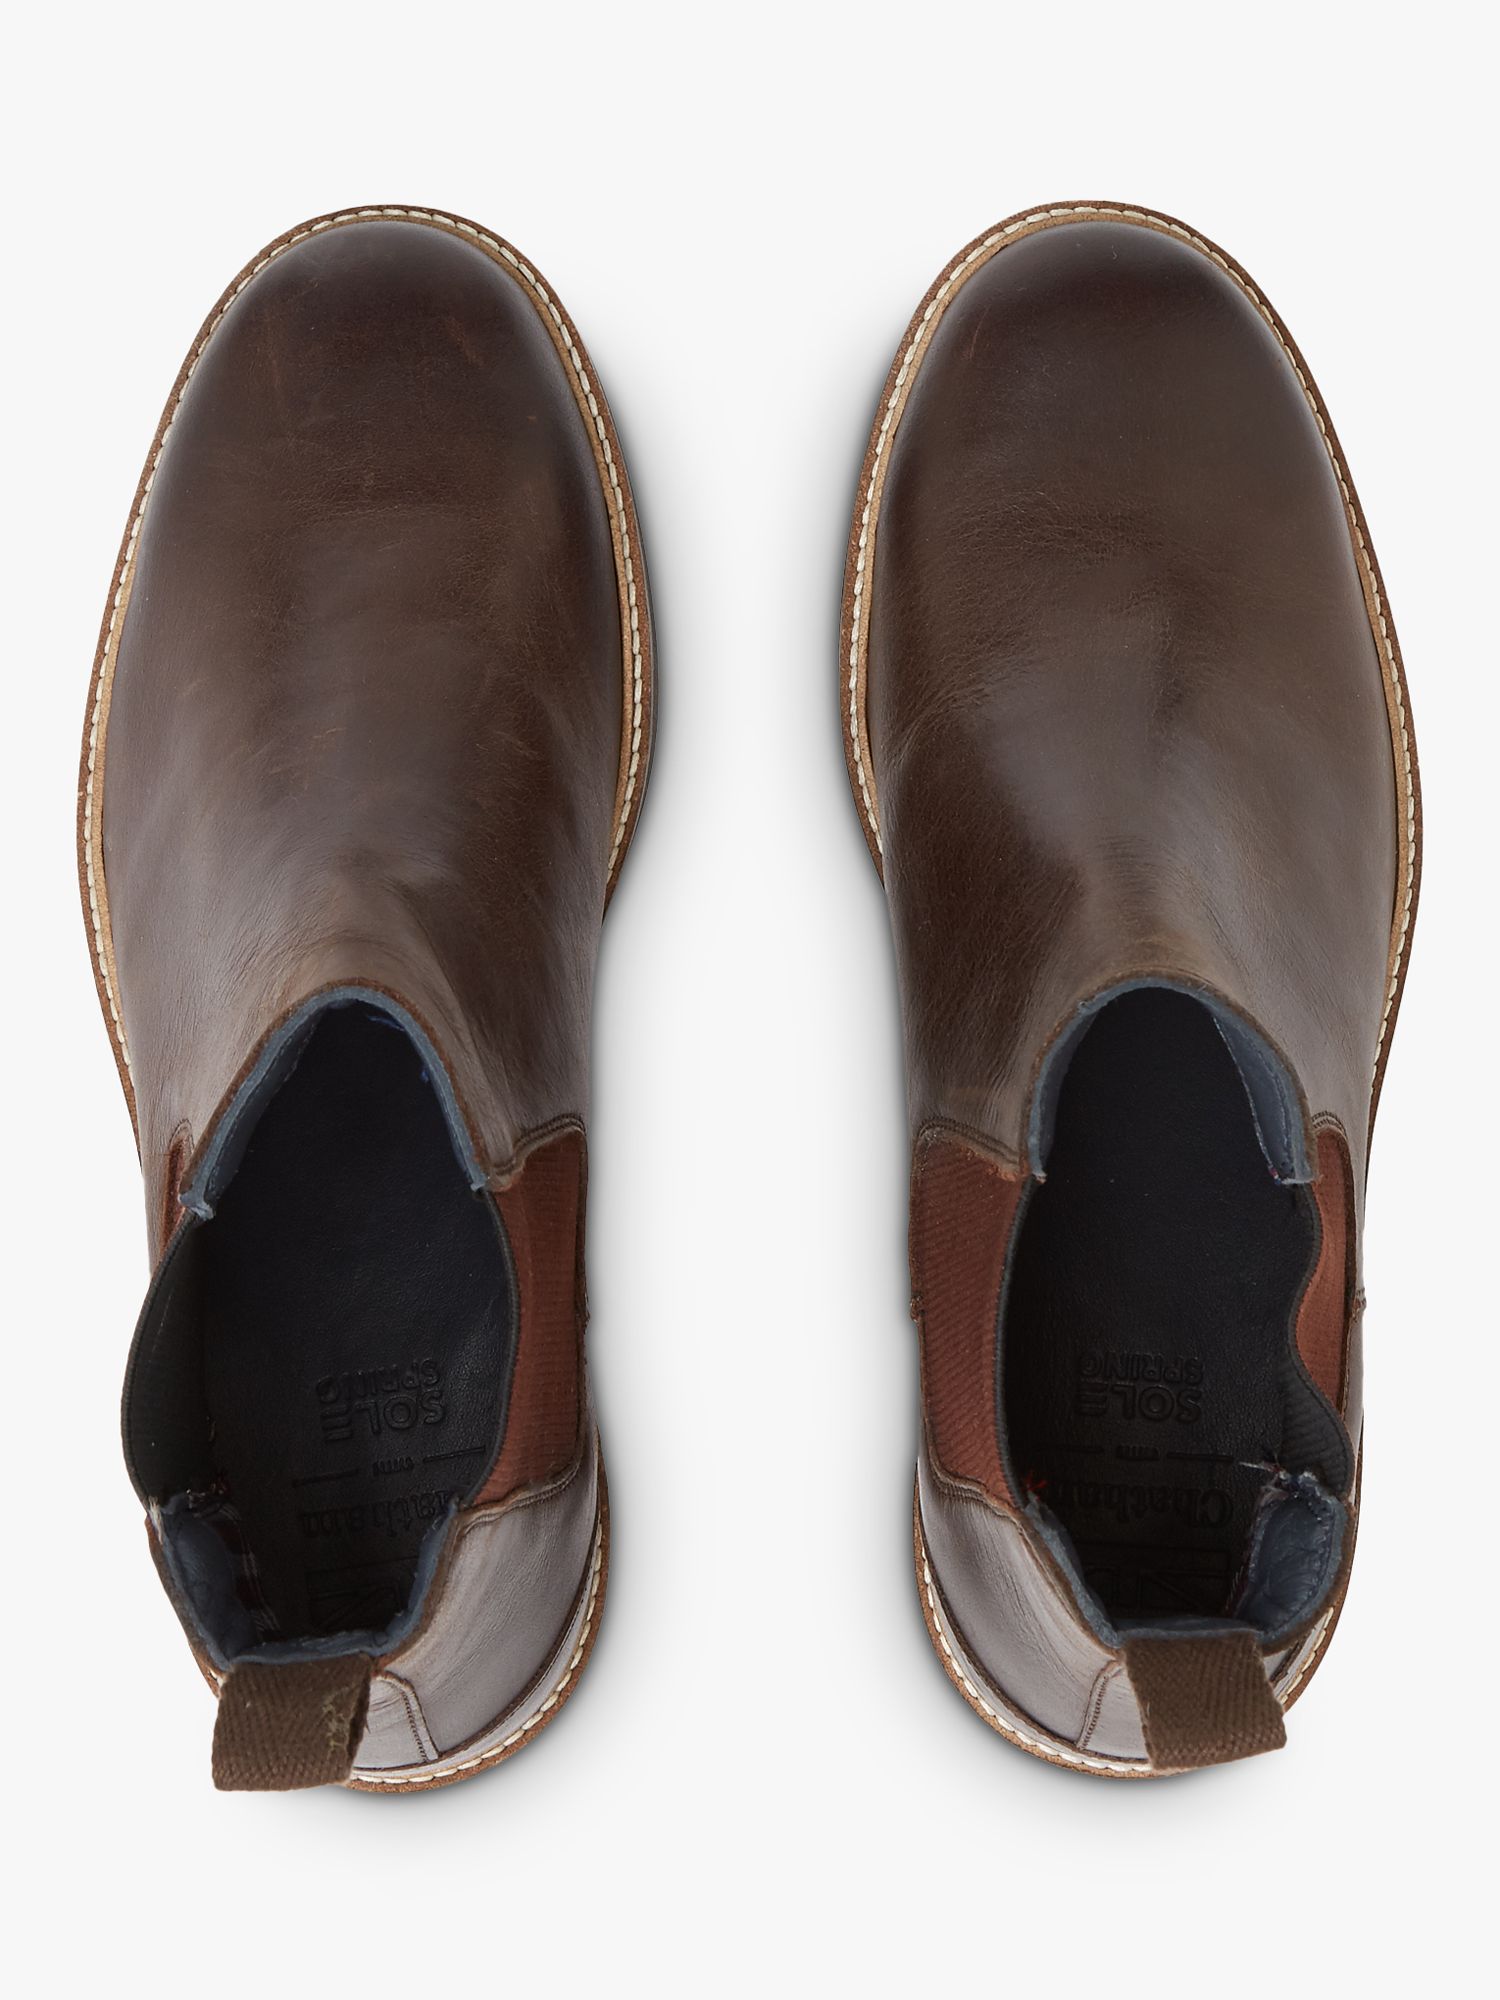 Buy Chatham Chirk Leather Chelsea Boots, Brown Online at johnlewis.com